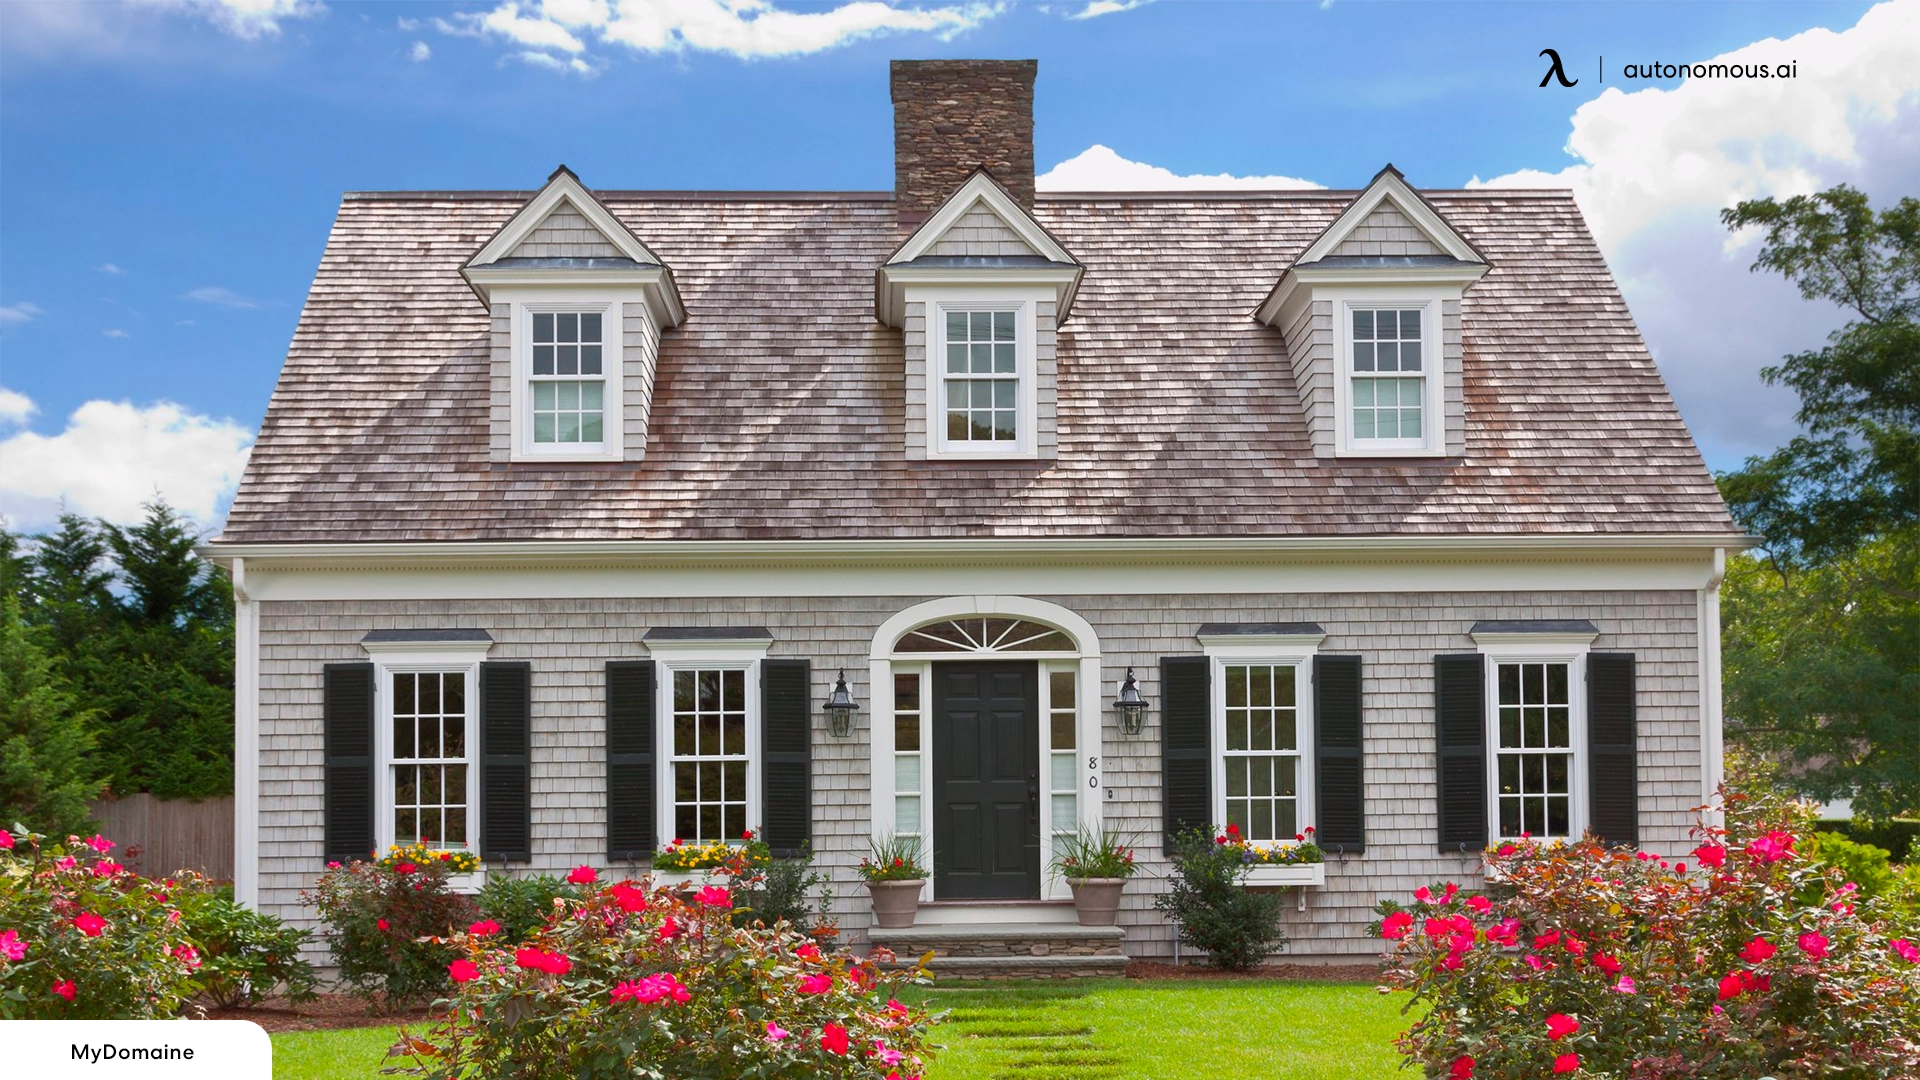 How Do Traditional-style Homes Differ from Other Architectural Styles?